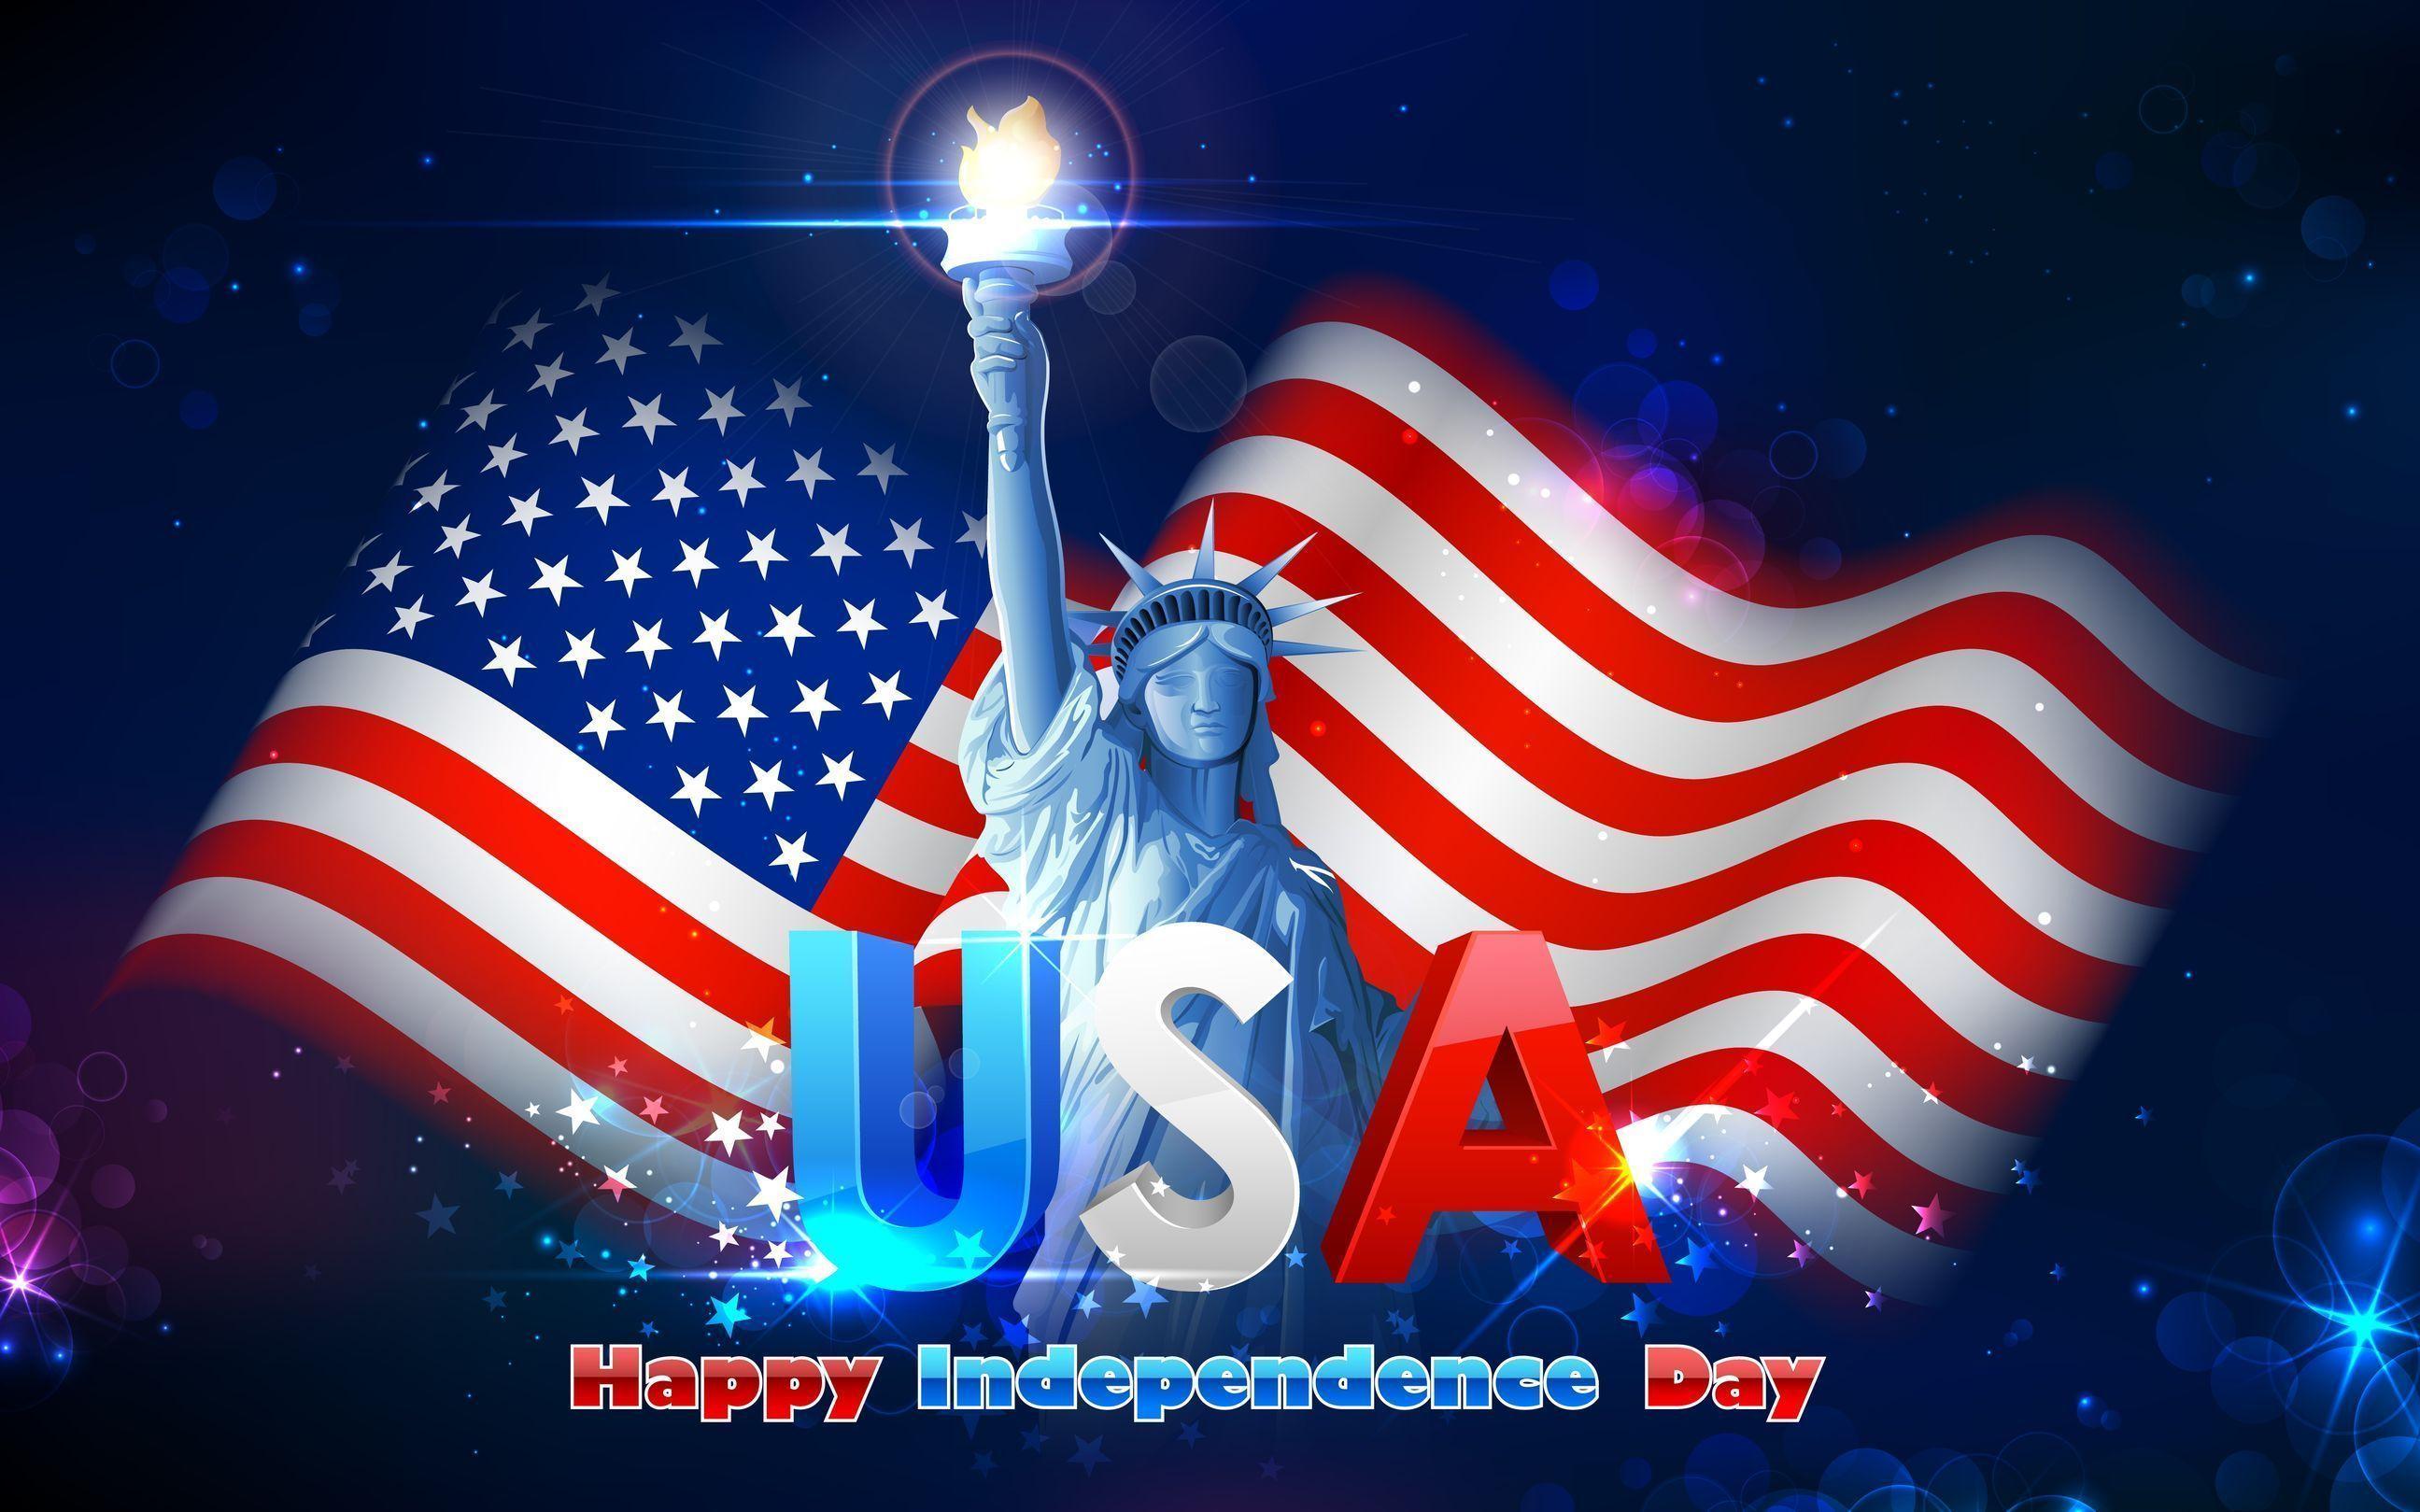 Happy Independence Day Wallpaper Free HD Wallpaper